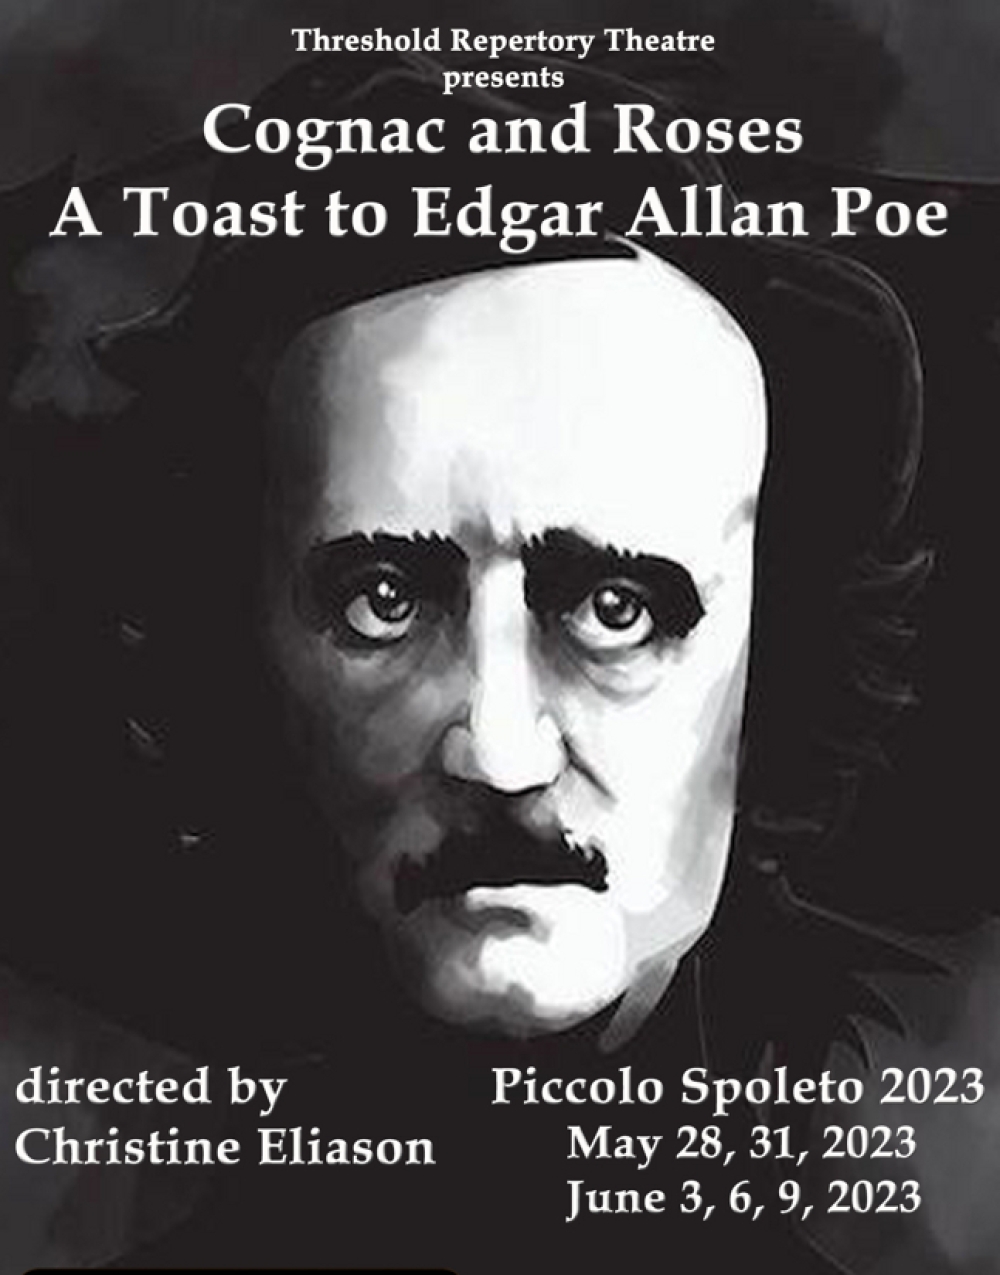 Cognac and Roses: A Toast to Edgar Allan Poe - Threshold Repertory Theatre Stage Mag